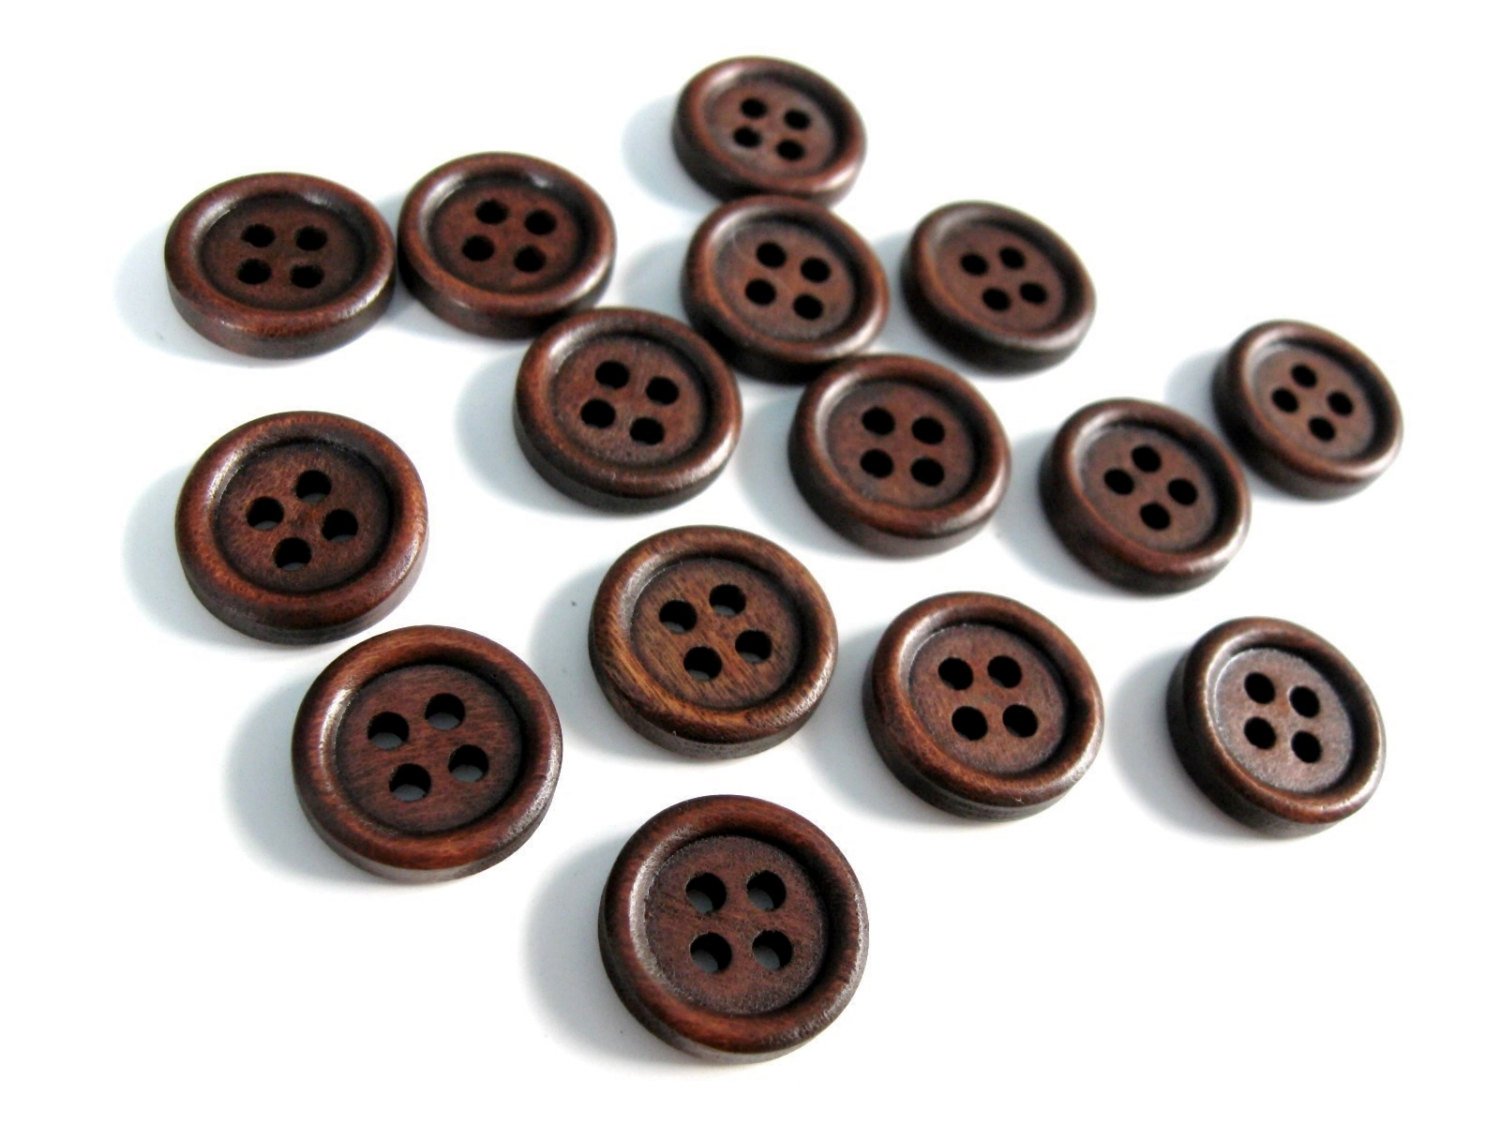 Wood button - Dark Brown 4 Holes Wooden Sewing Buttons 15mm - set of 15